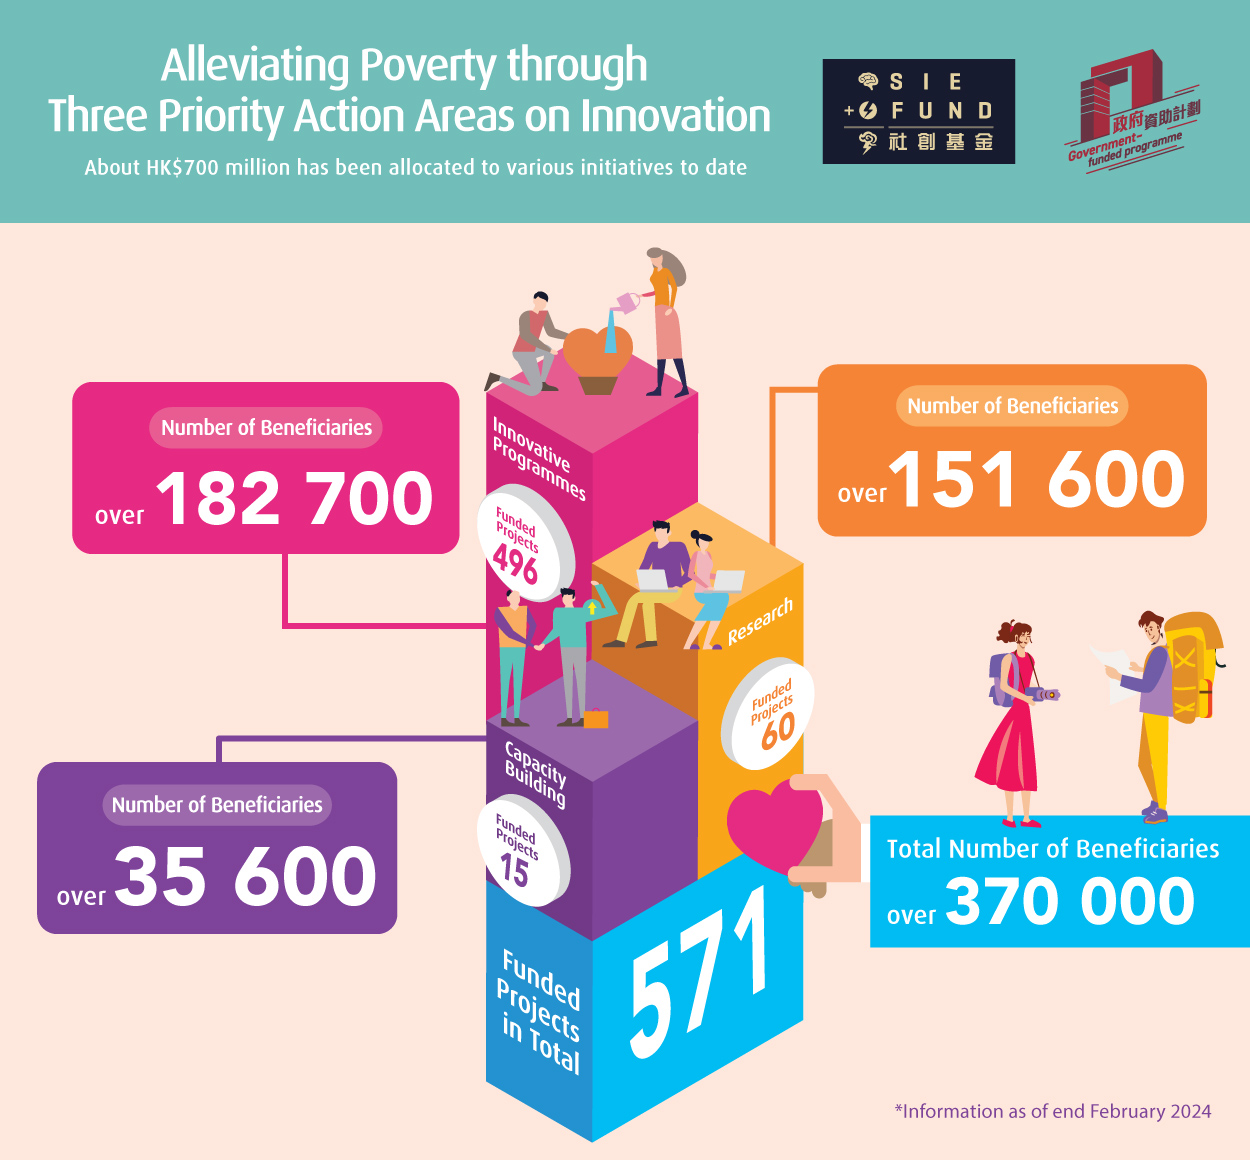 The SIE Fund seeks to alleviate poverty through three priority action areas on innovation.  About HK$700 million has been allocated to various initiatives as of February 2024.  The number of funded projects in total is 571 and the total number of beneficiaries is over 370000.  Under Innovative Programmes, the number of funded projects is 496 and the number of beneficiaries is over 182700.  Under Capacity Building, the number of funded projects is 15 and the number of beneficiaries is over 35600.  Under Research, the number of funded projects is 60 and the number of beneficiaries is over 151600.